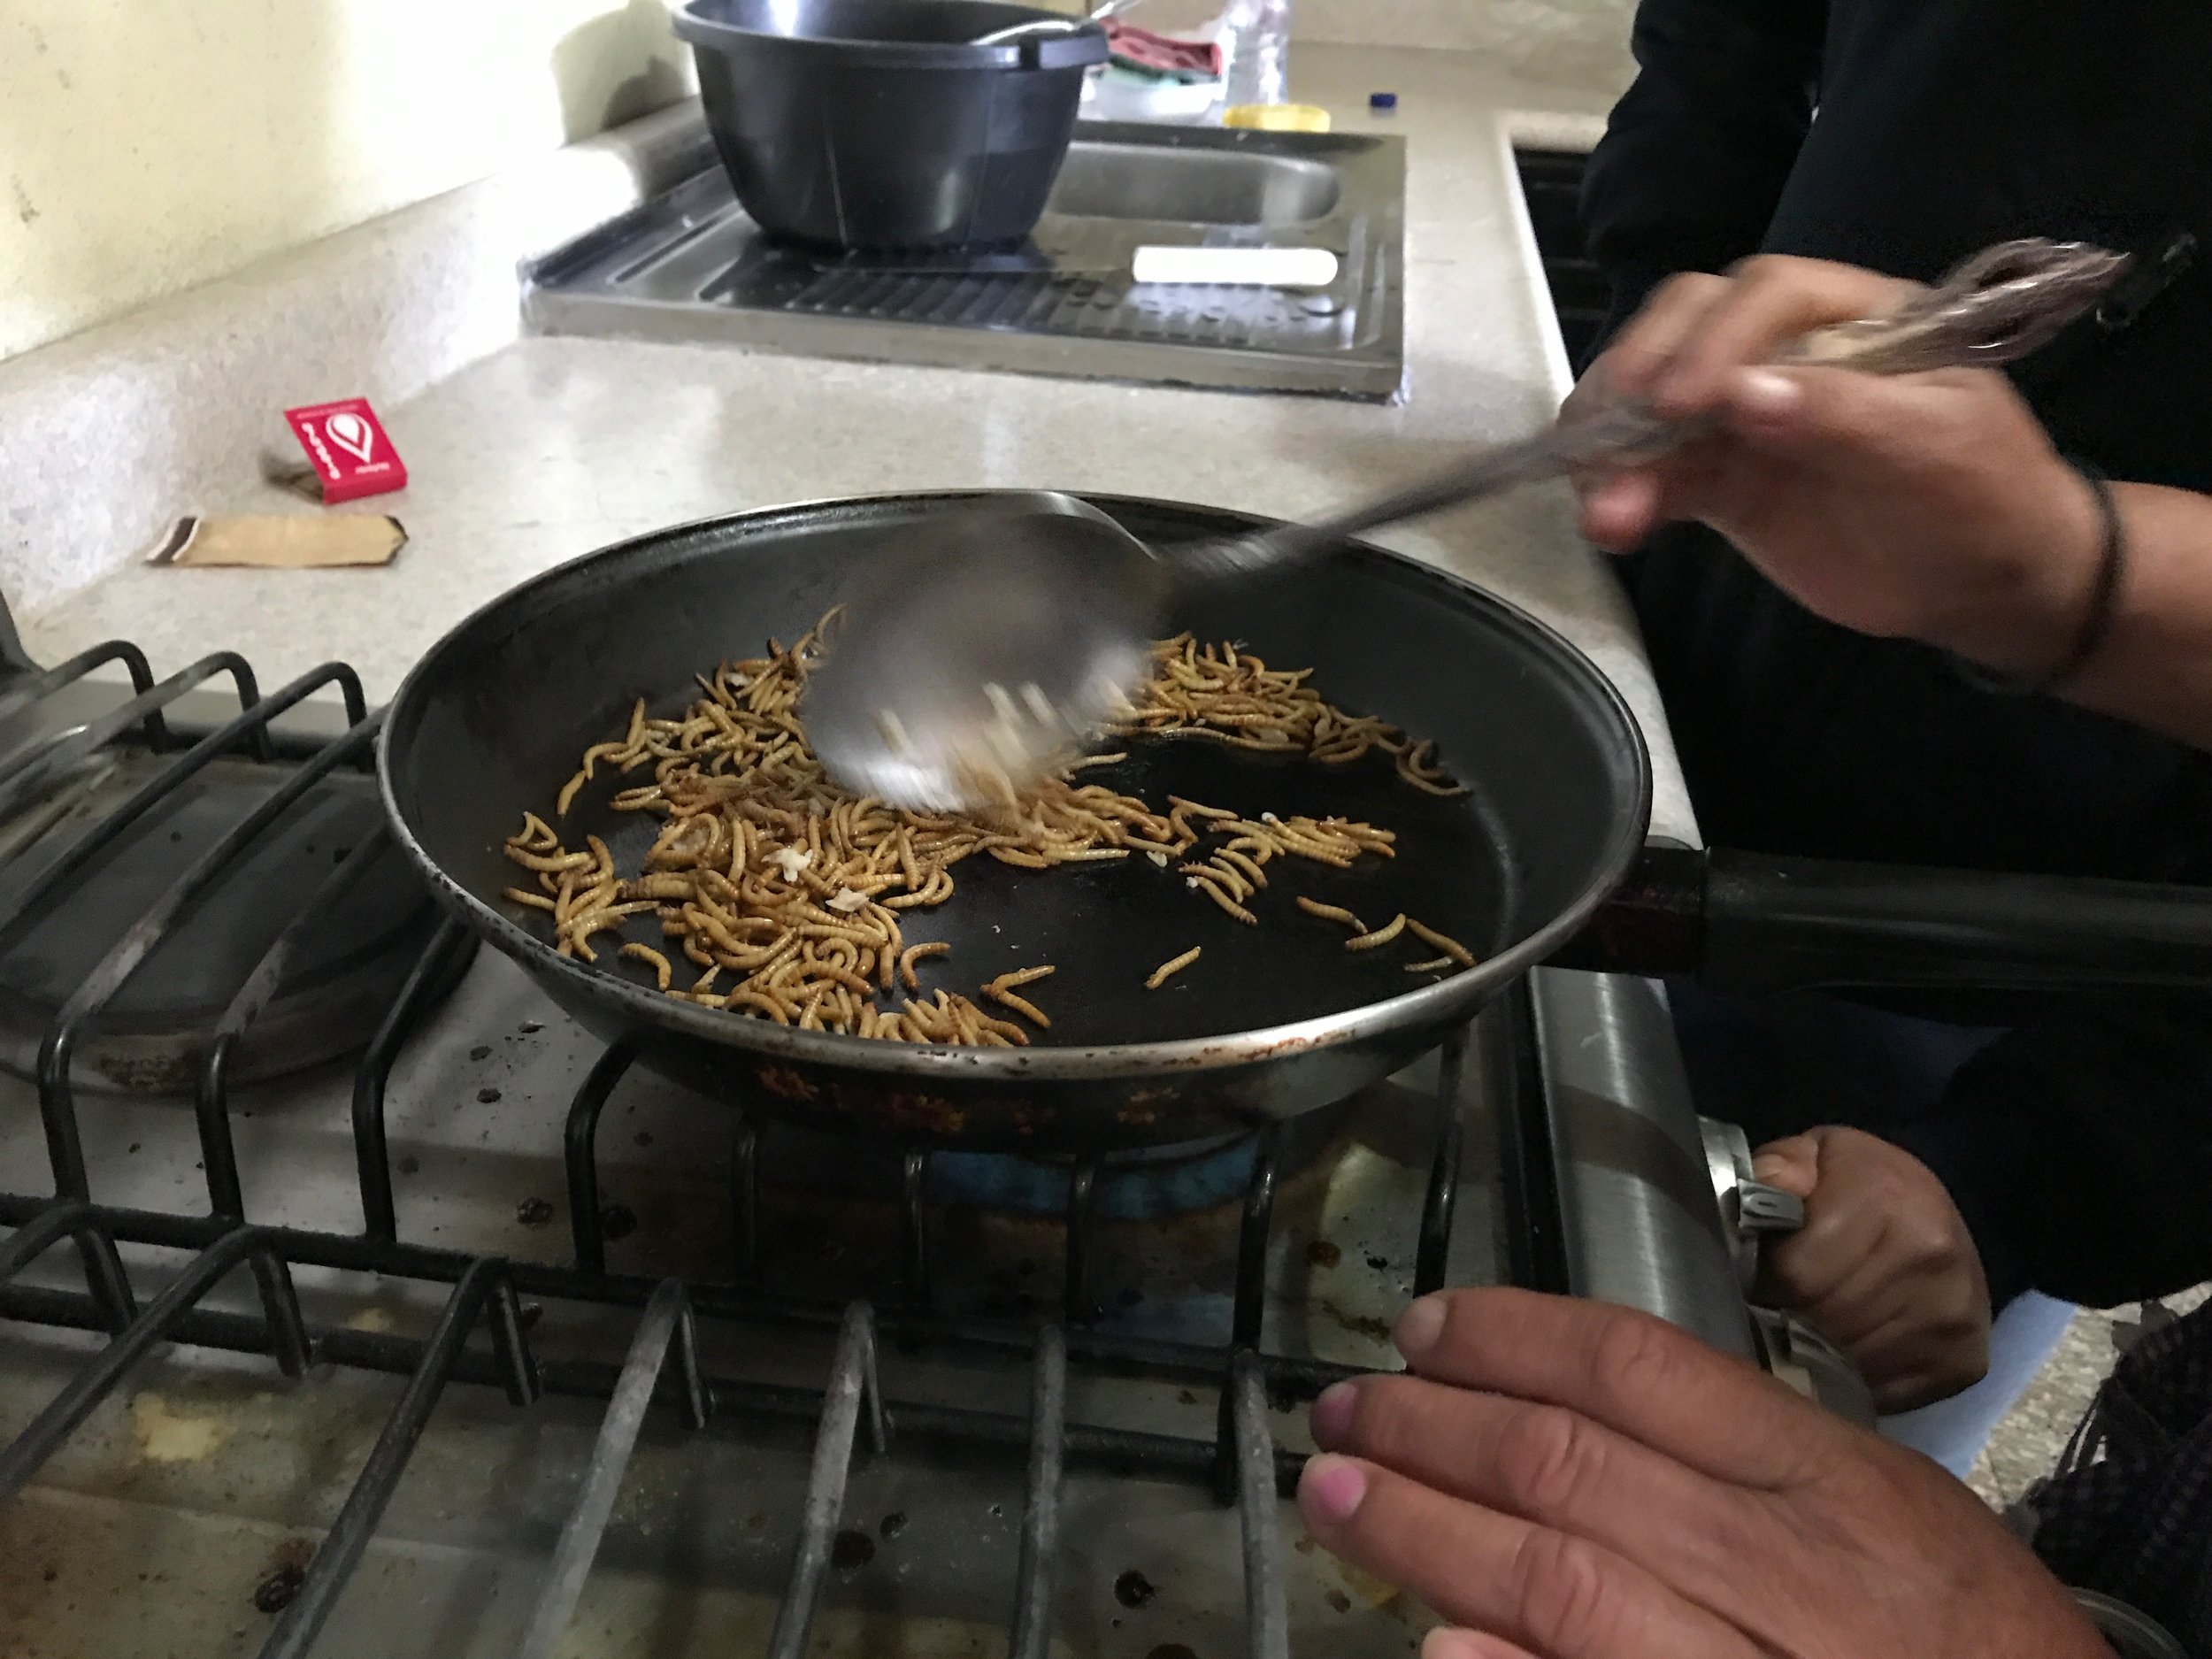 7:1:18 PEILE worms in pan and stove.JPG